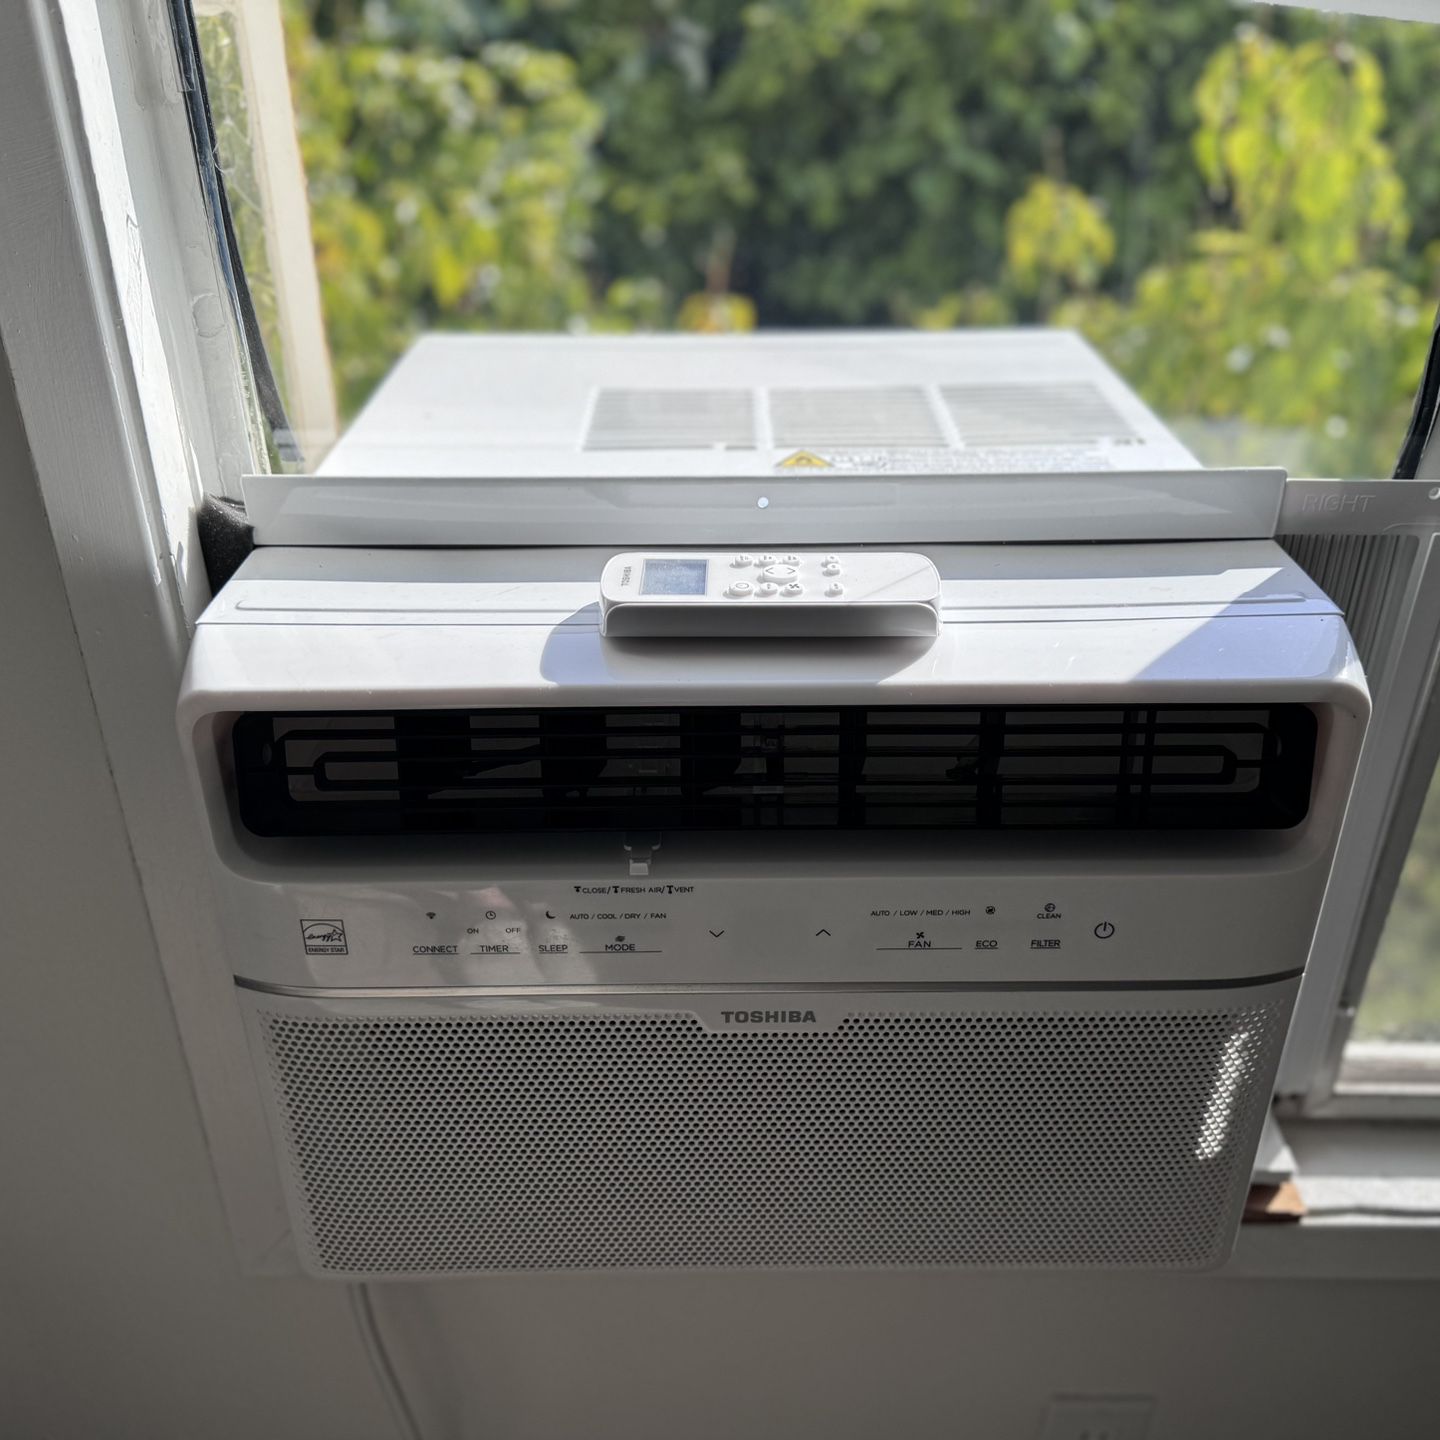 Moving sale: Toshiba Window Air Conditioner